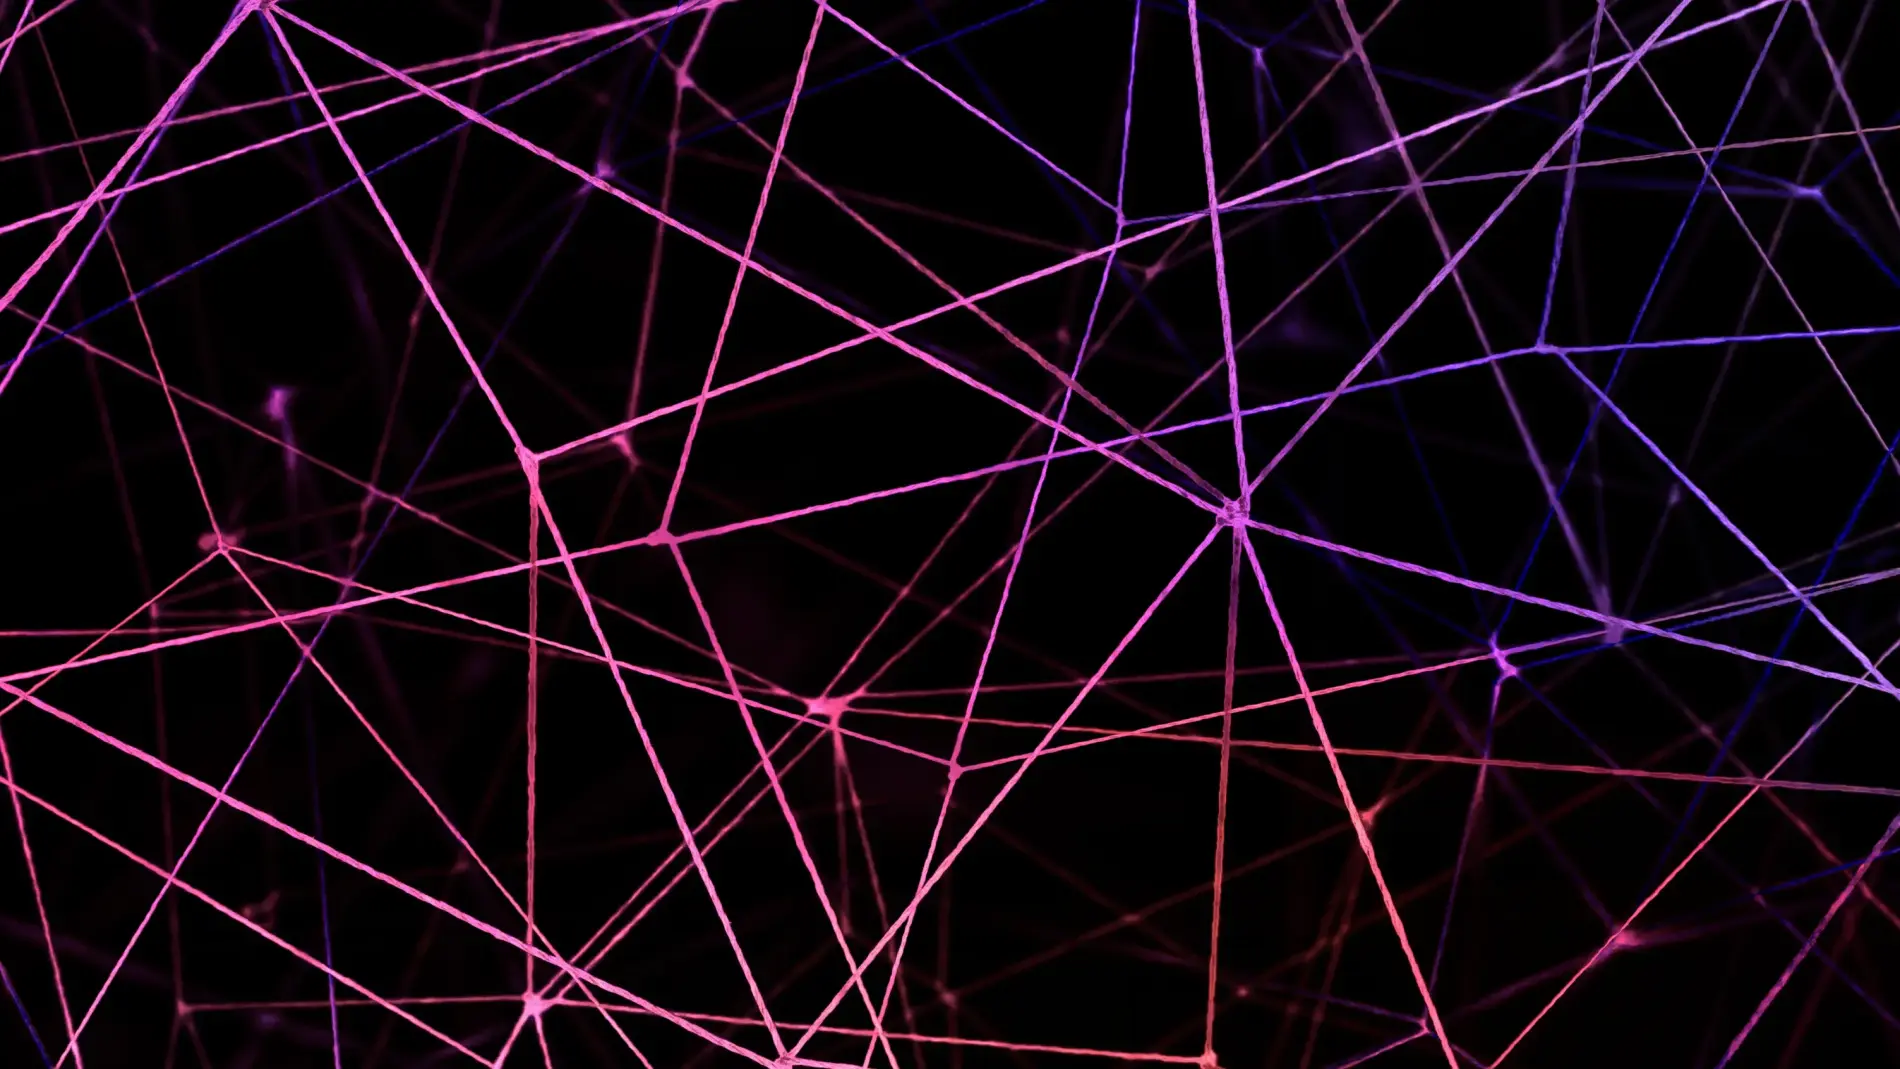 A series of pink-purple threads representing a decentralised system.

Credit to rawpixel.com